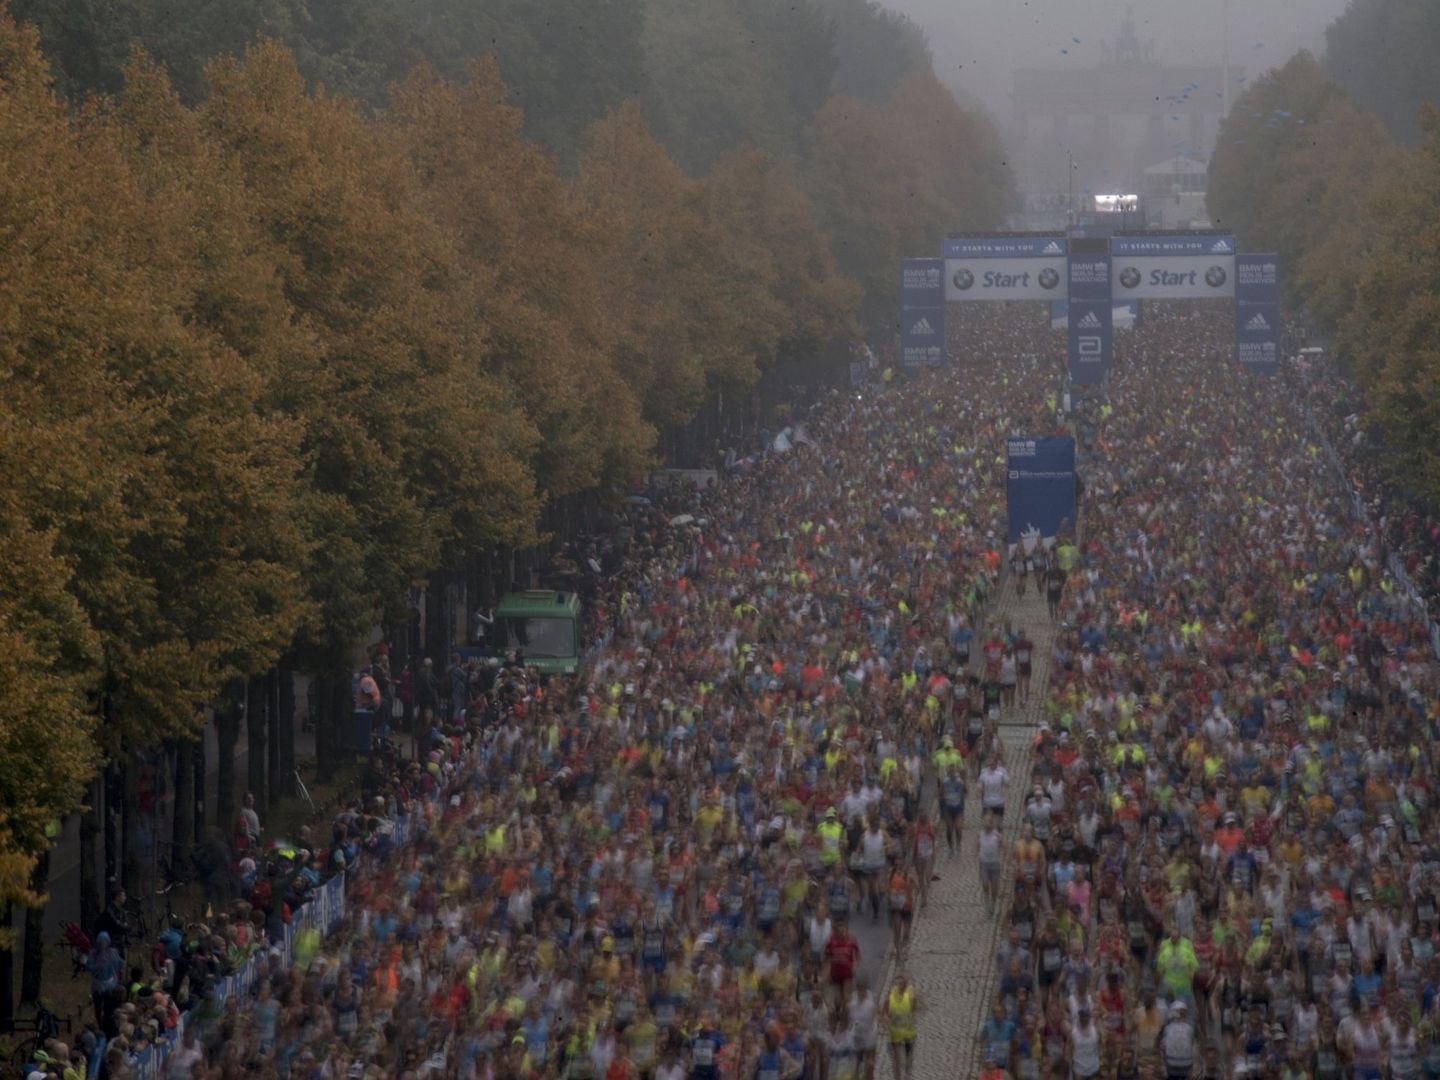 Berlin (Germany), 24 09 2017.- Athletes compete in the Berlin Marathon in Berlin, Germany, 24 September 2017. Over 44,000 athletes participated in the 44th edition of the race in the German capital. (Maratón, Alemania) EFE EPA CHRISTIAN BRUNA